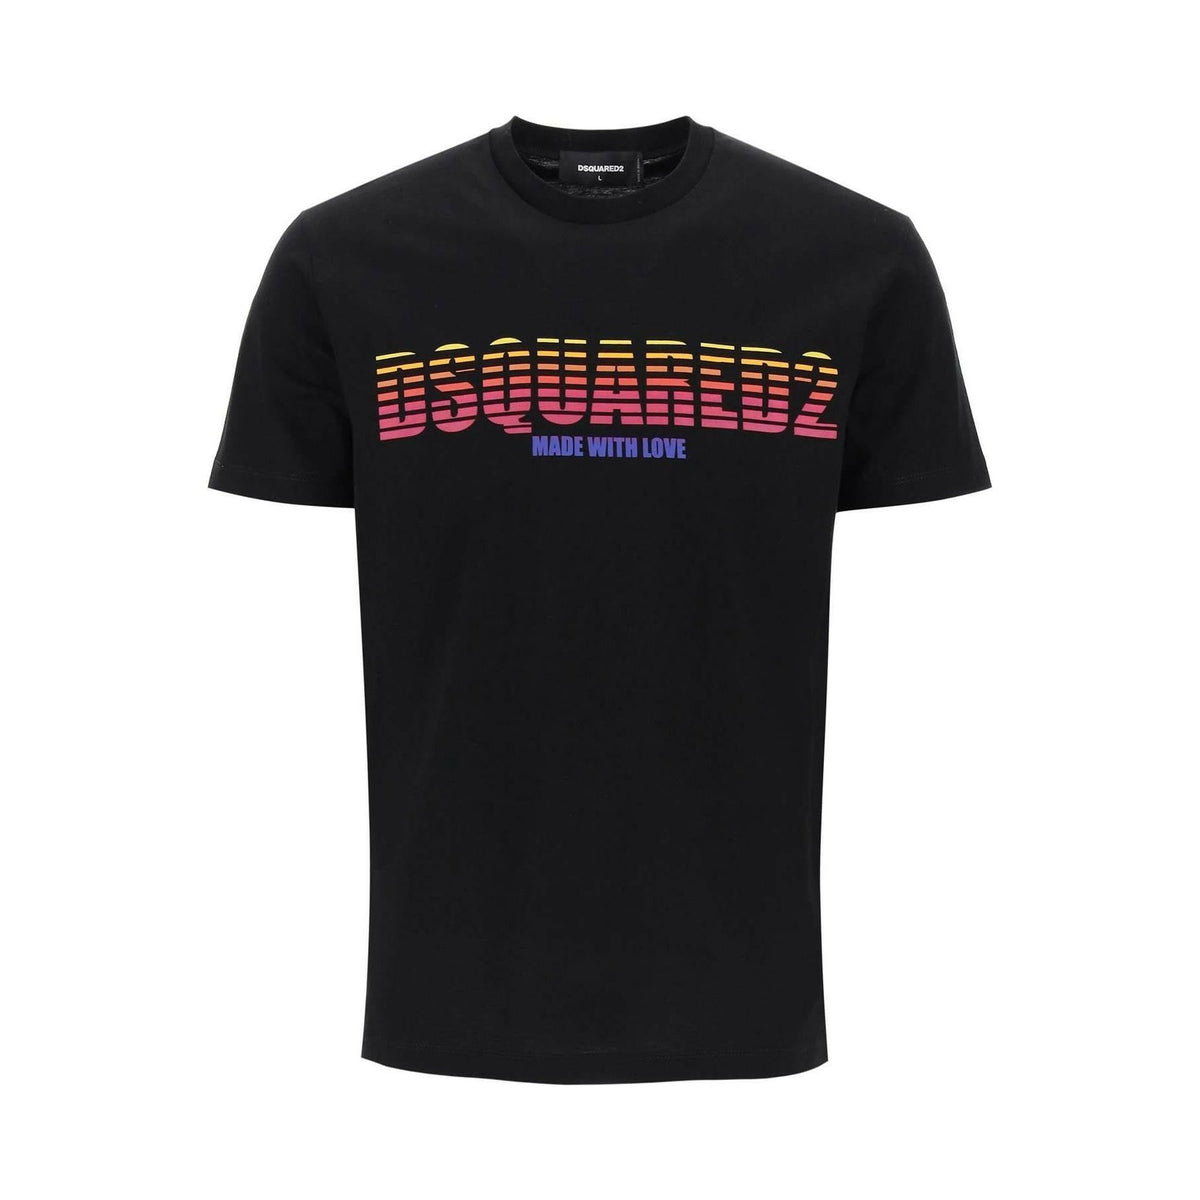 Black Cotton Made With Love Cool Fit T-Shirt DSQUARED2 JOHN JULIA.